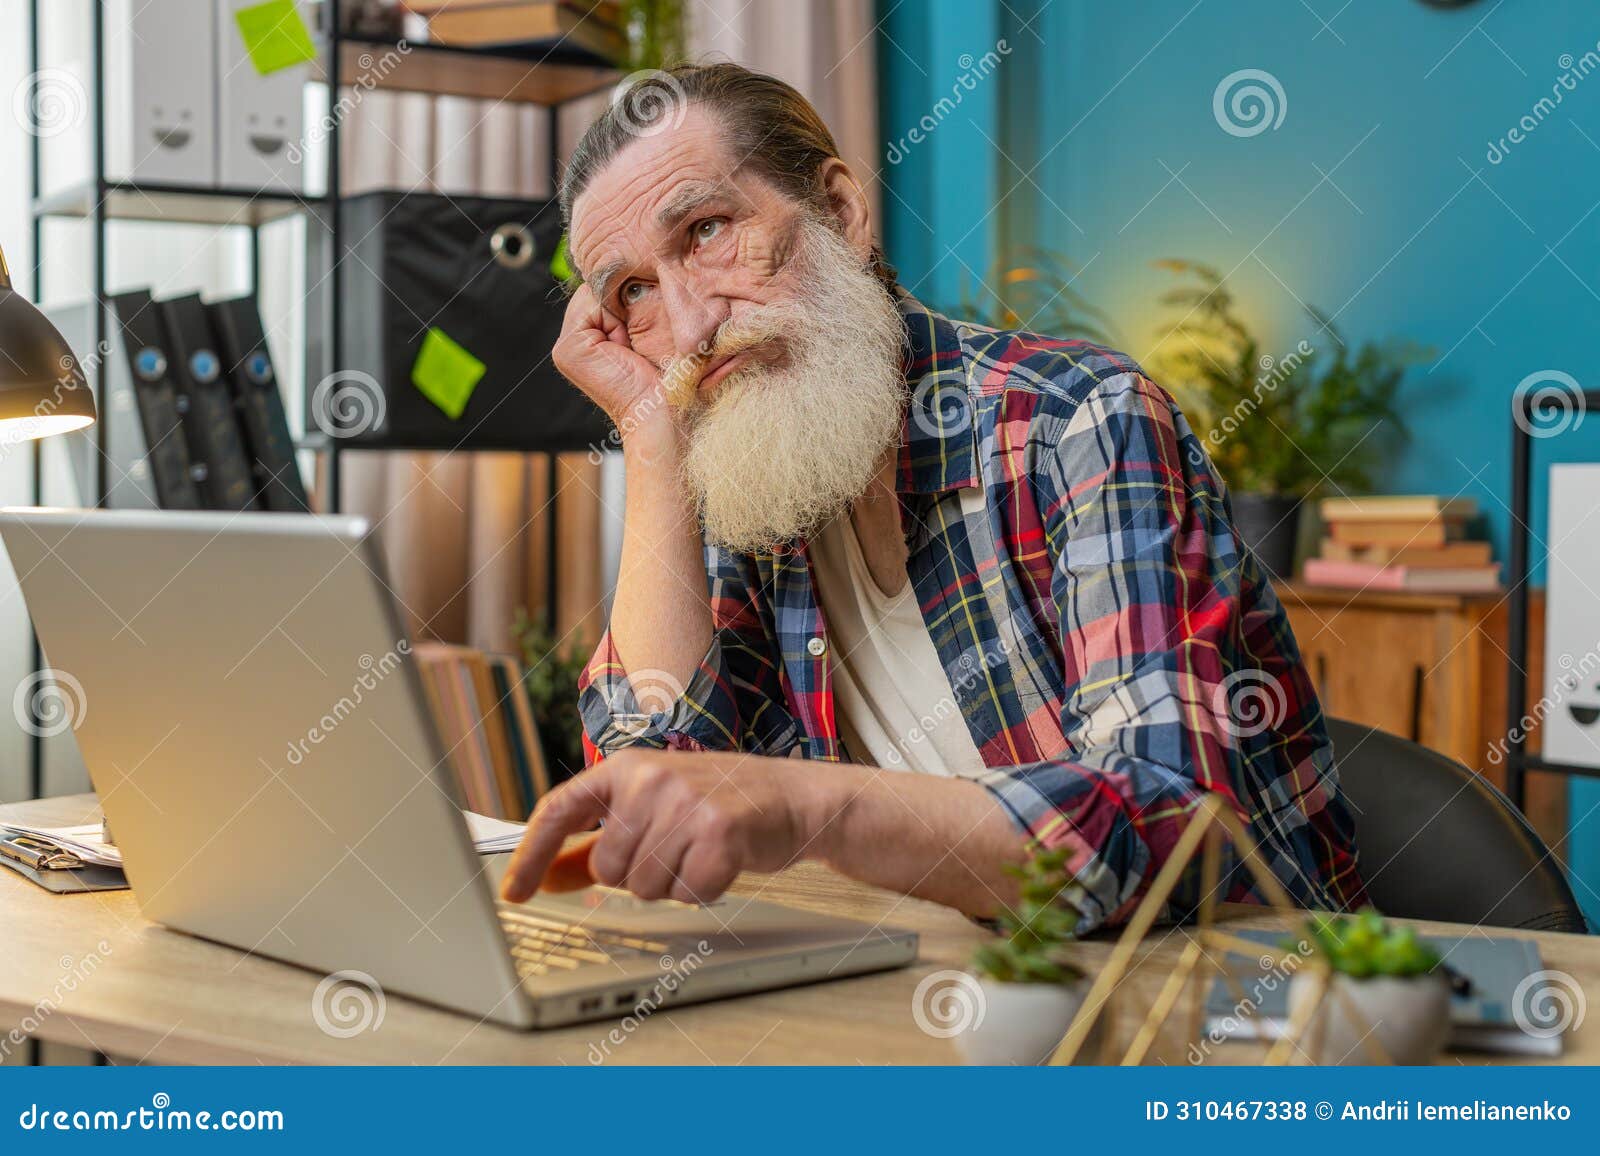 overtired sleepy lazy senior man grandfather bored working on laptop while sitting in home office